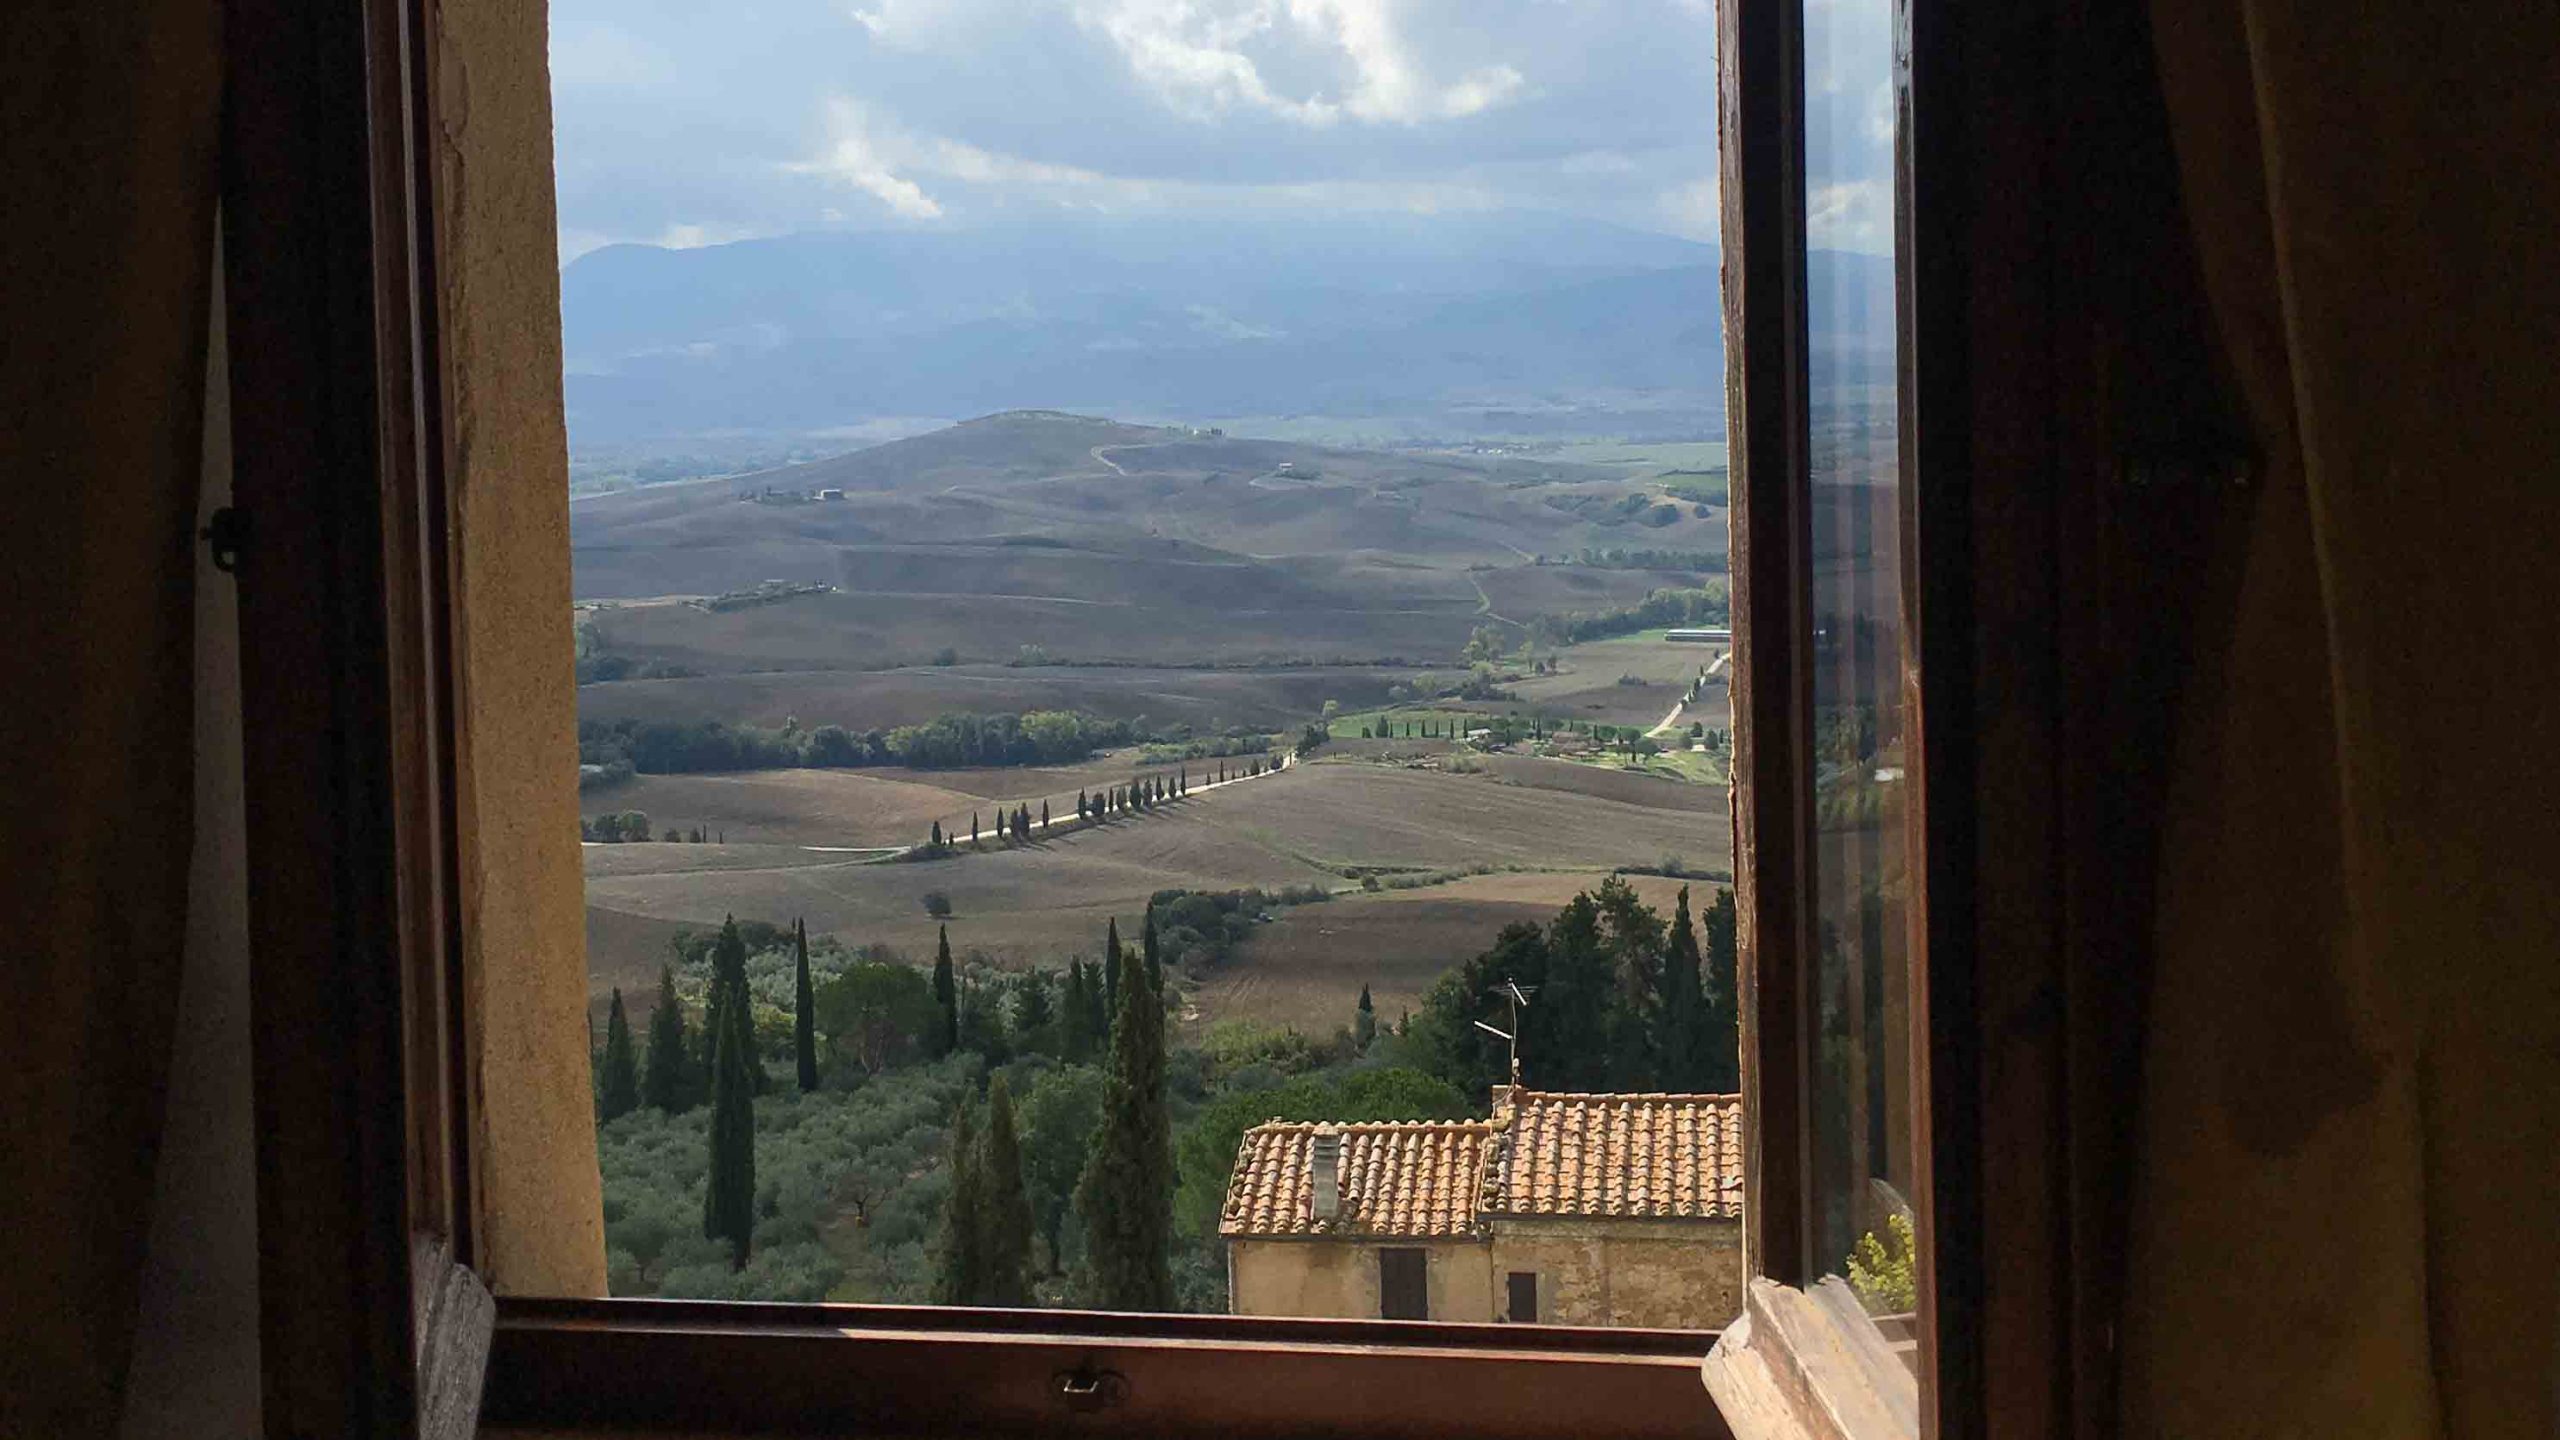 View from the window over Tuscan countryside